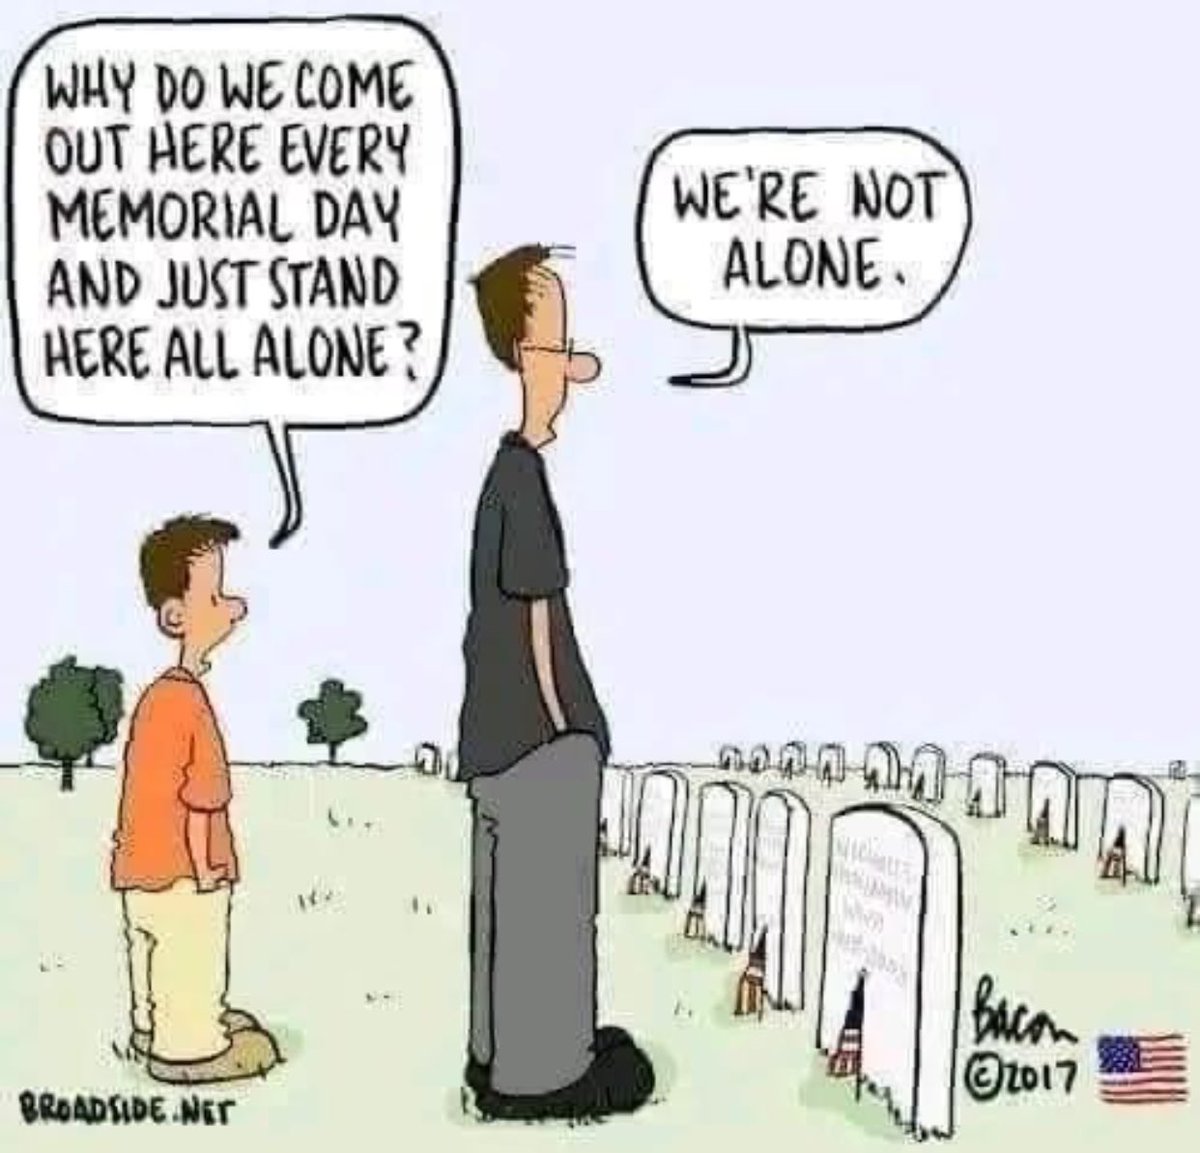 Much love and many blessings on Memorial Day.  #Mindfulness #MindfulMoments #lifetips #MentalHealthWeek #lifequotes #BlessedAndThankful #PeaceForAll